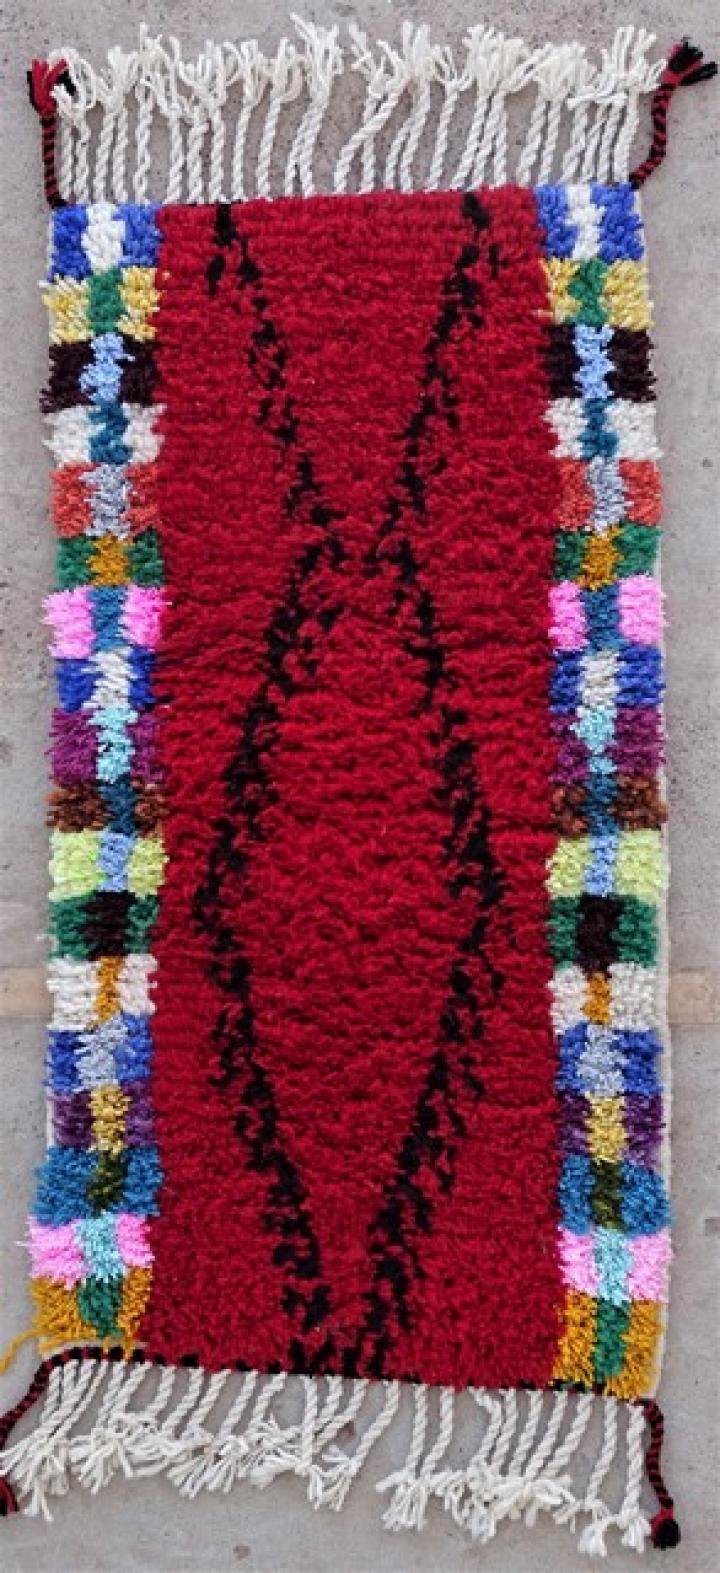 Berber rug #BO53109 type Beni Ourain and Boujaad with colors